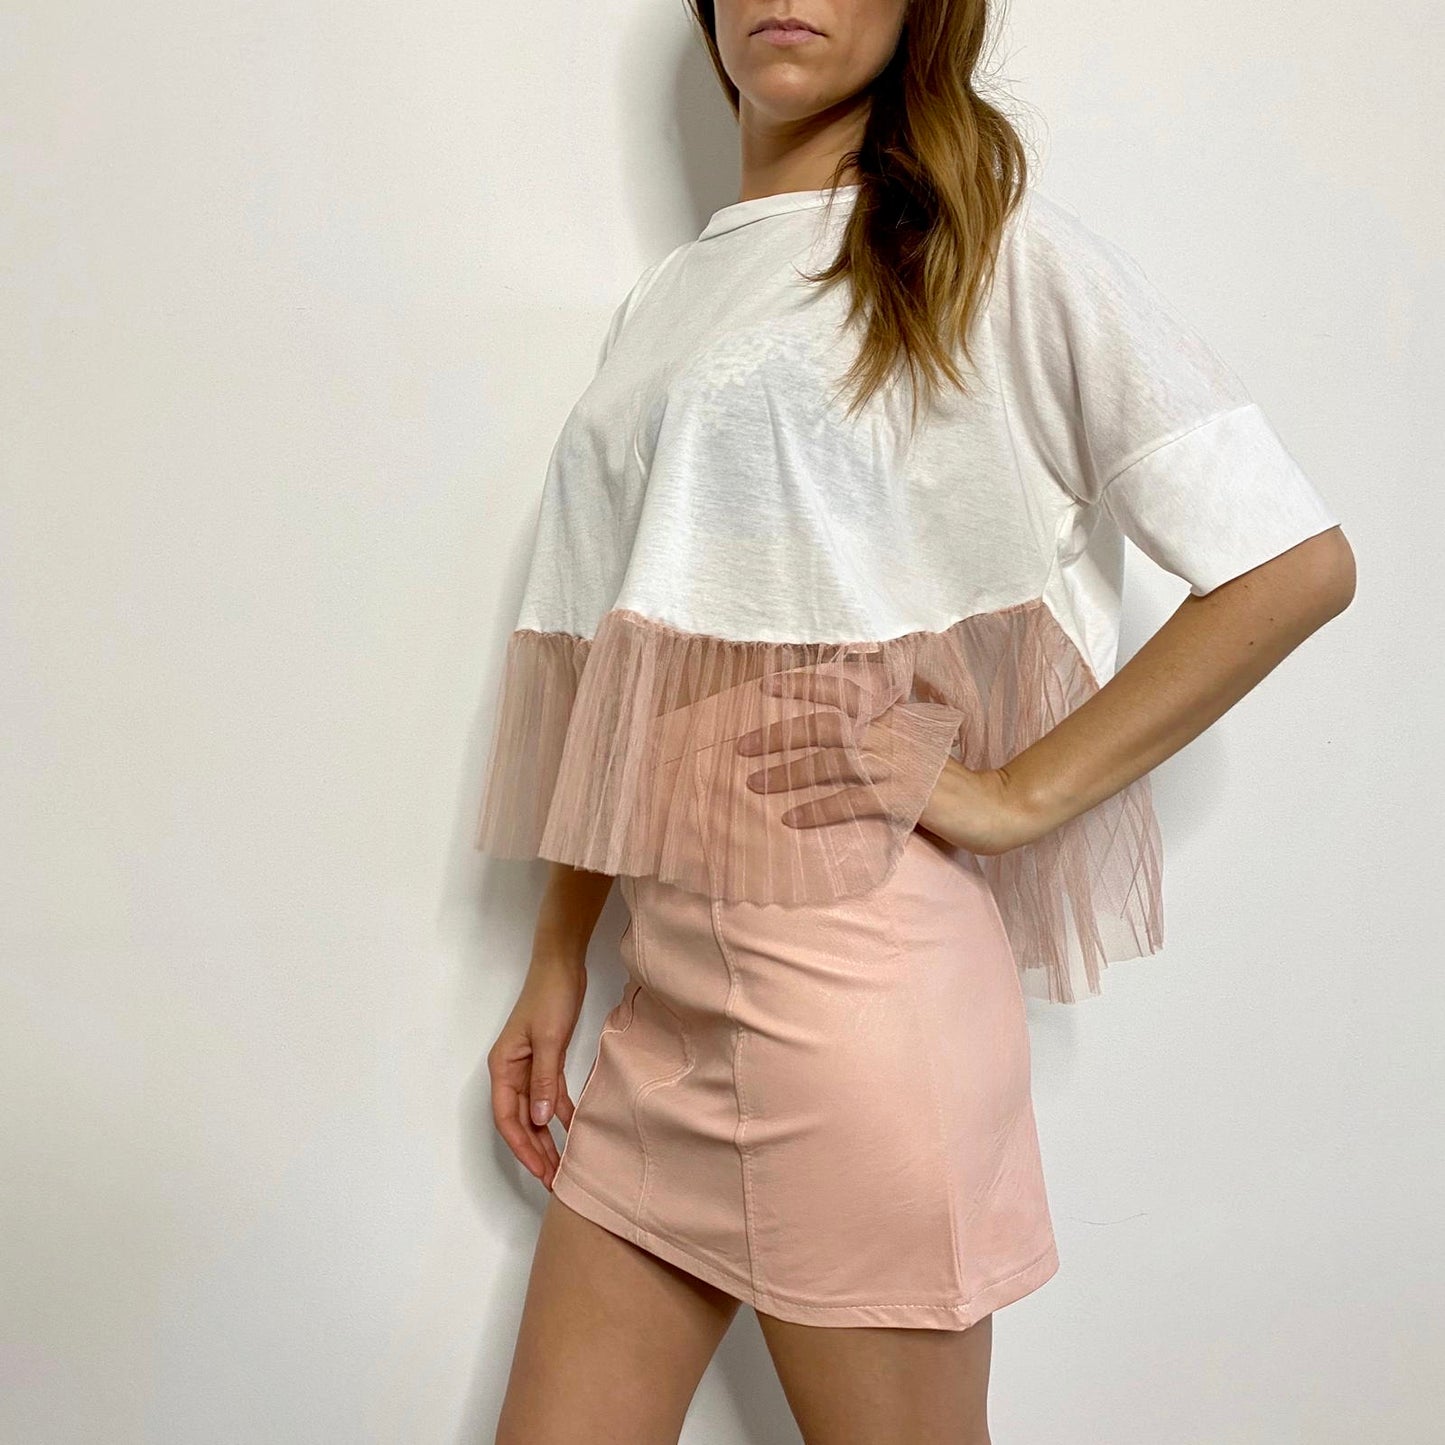 T-shirt crop bianca con tulle rosa